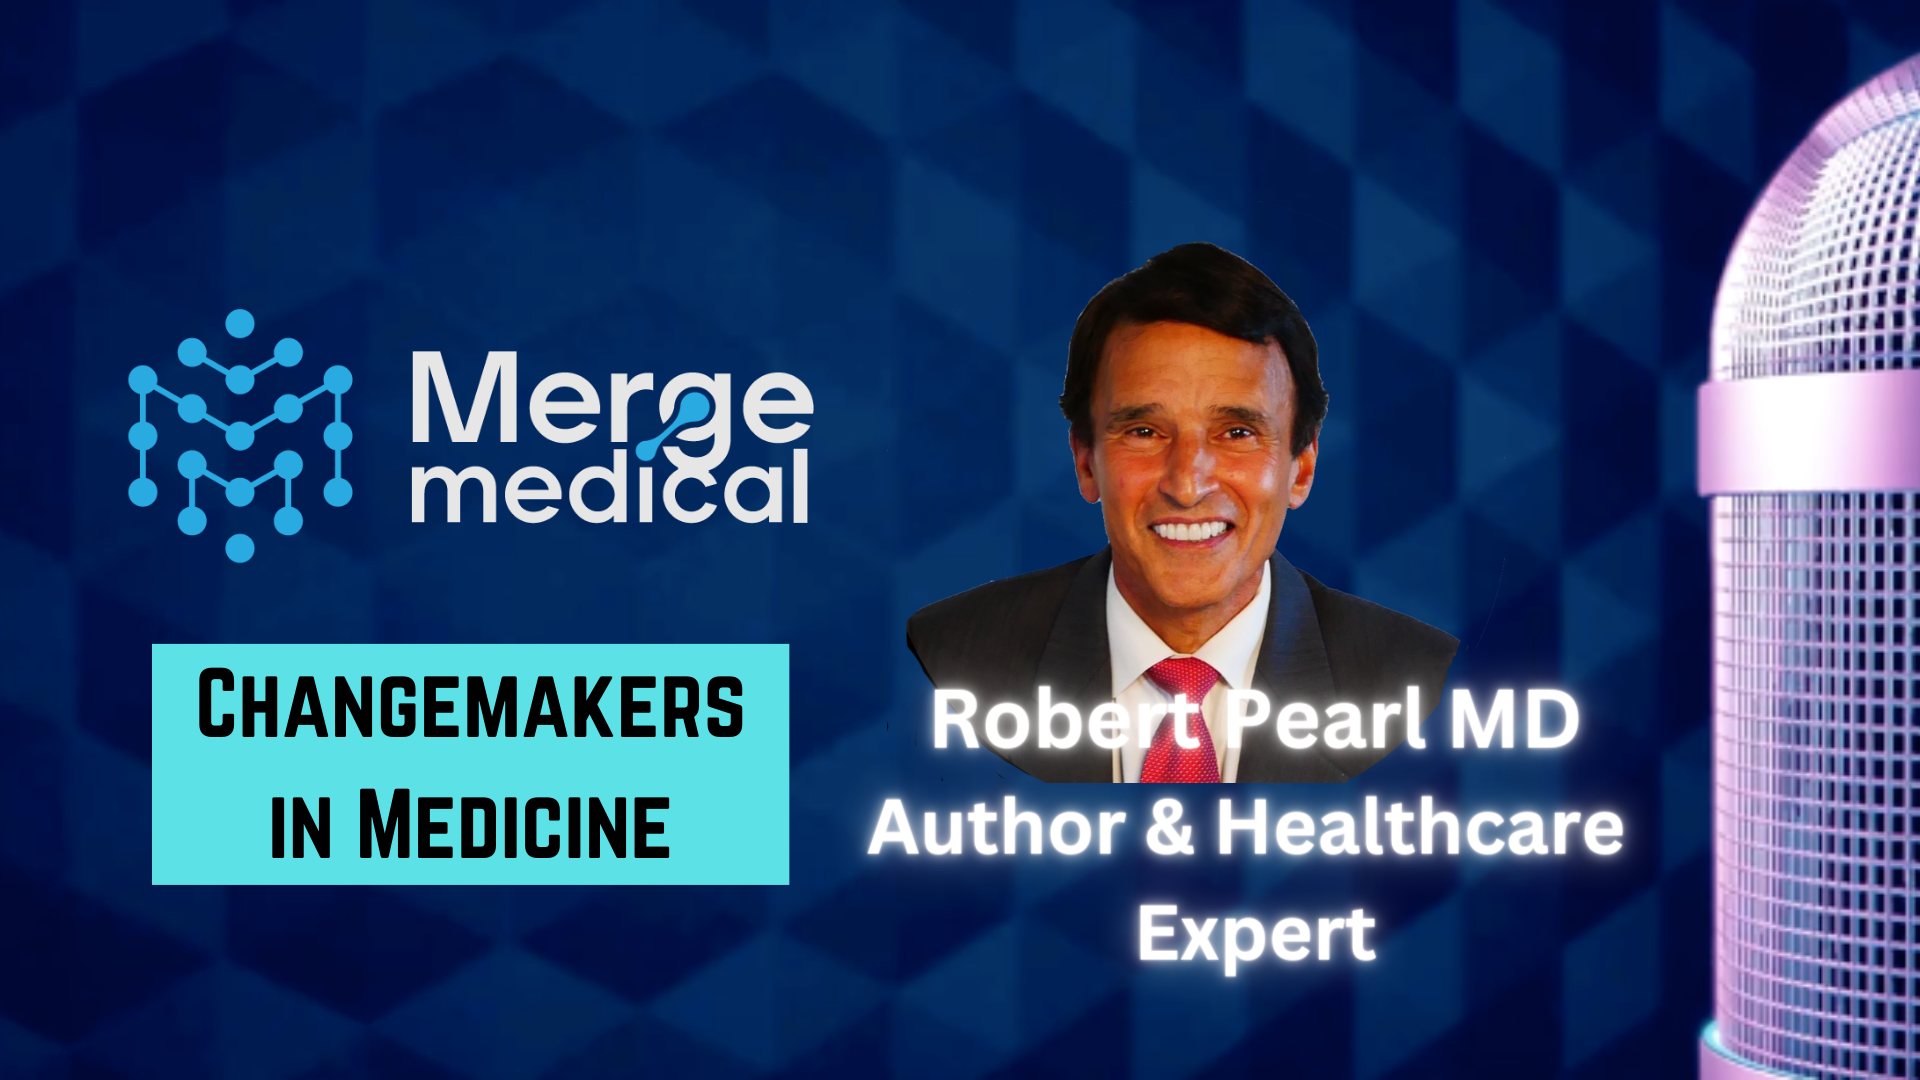 Merge Medical with Robert Pearl, MD: Changemakers in Medicine